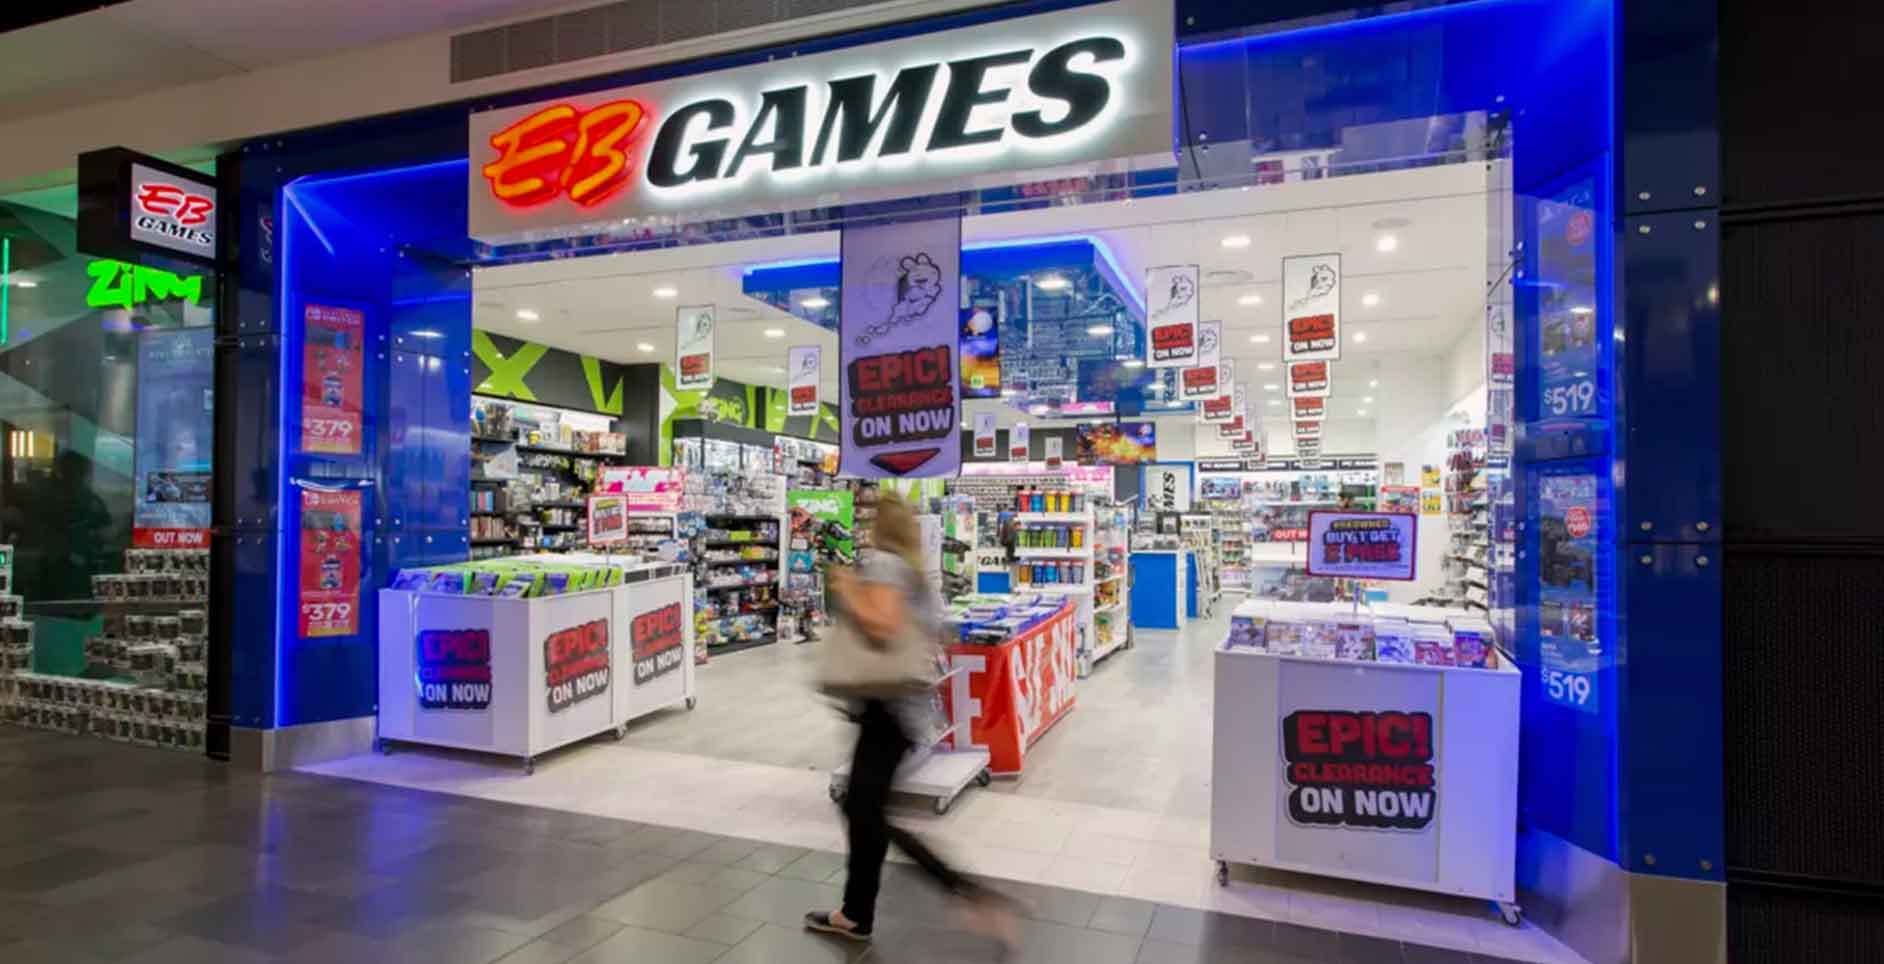 eb games ps4 used